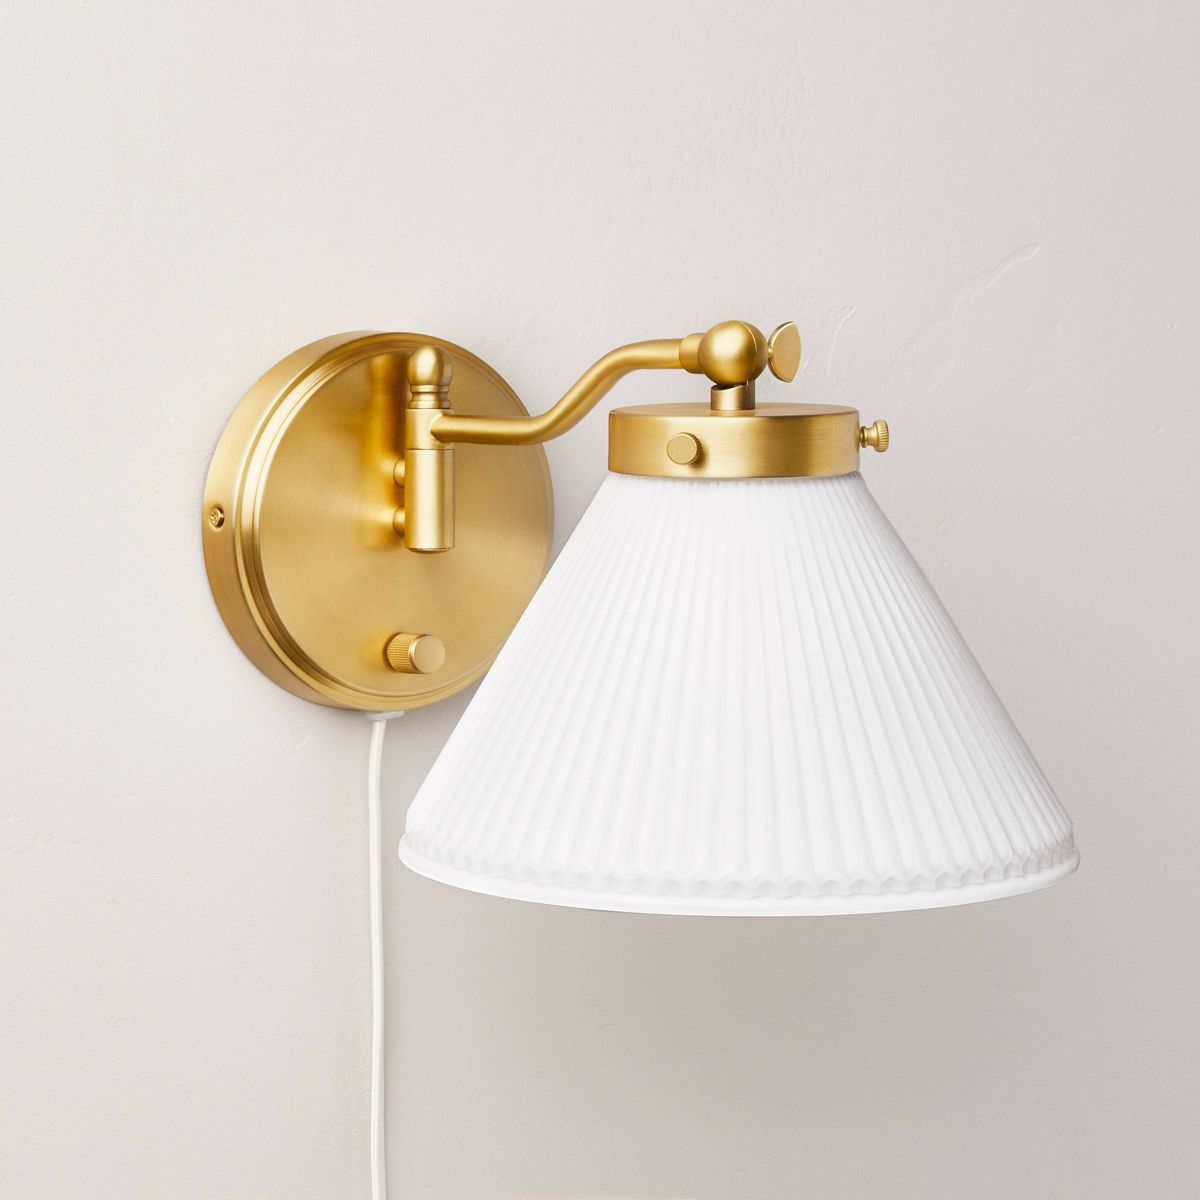 Reeded Milk Glass Wall Sconce Brass Finish - Hearth & Hand™ with Magnolia | Target